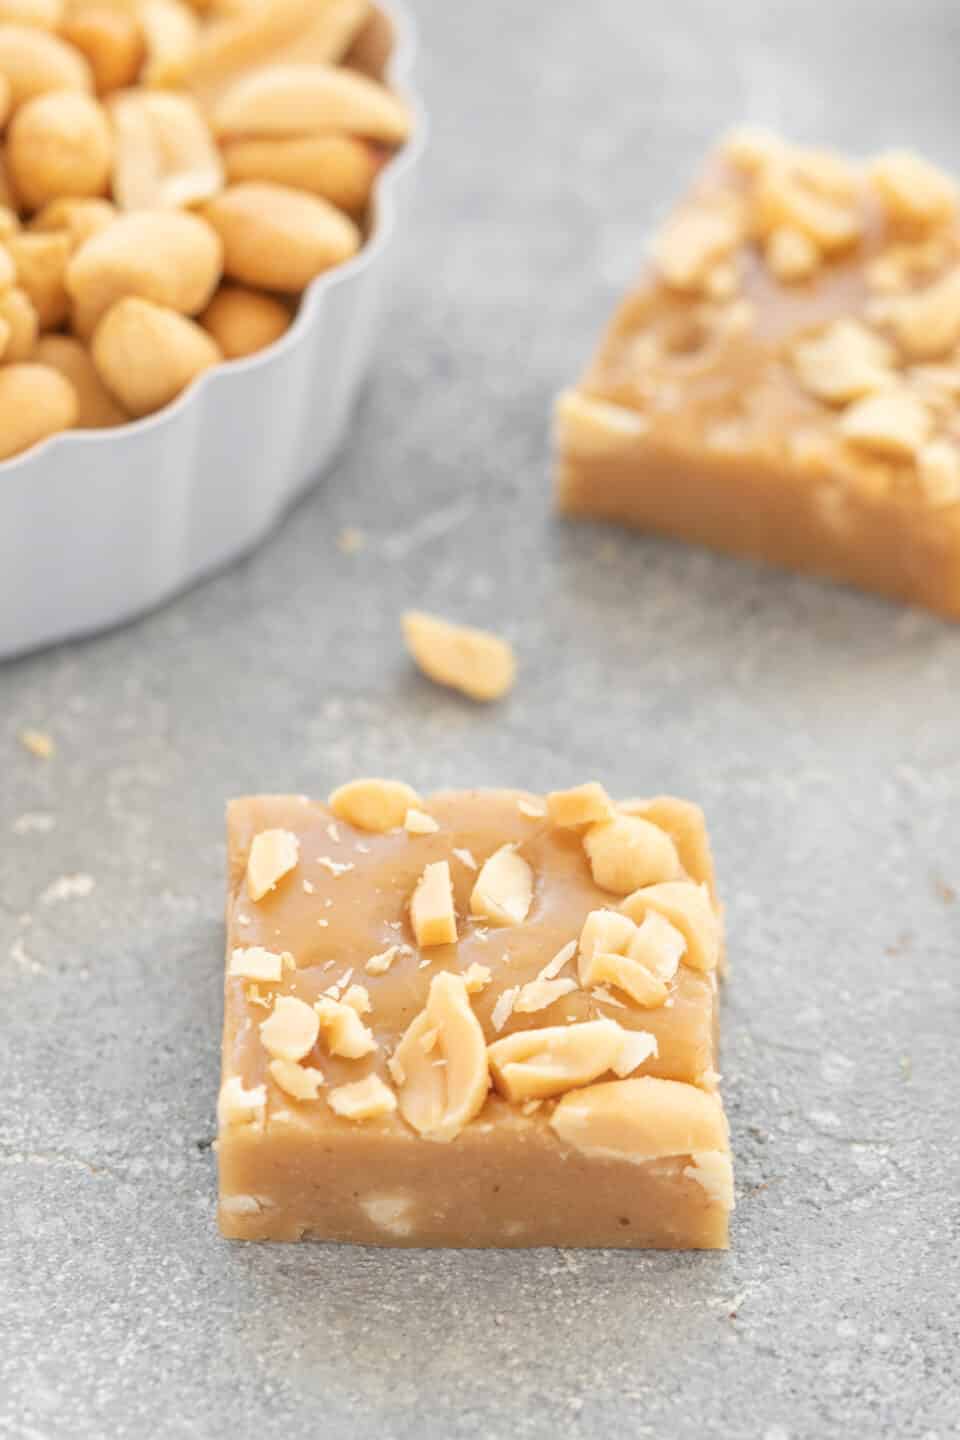 Delicious Fudge with Peanut Butter